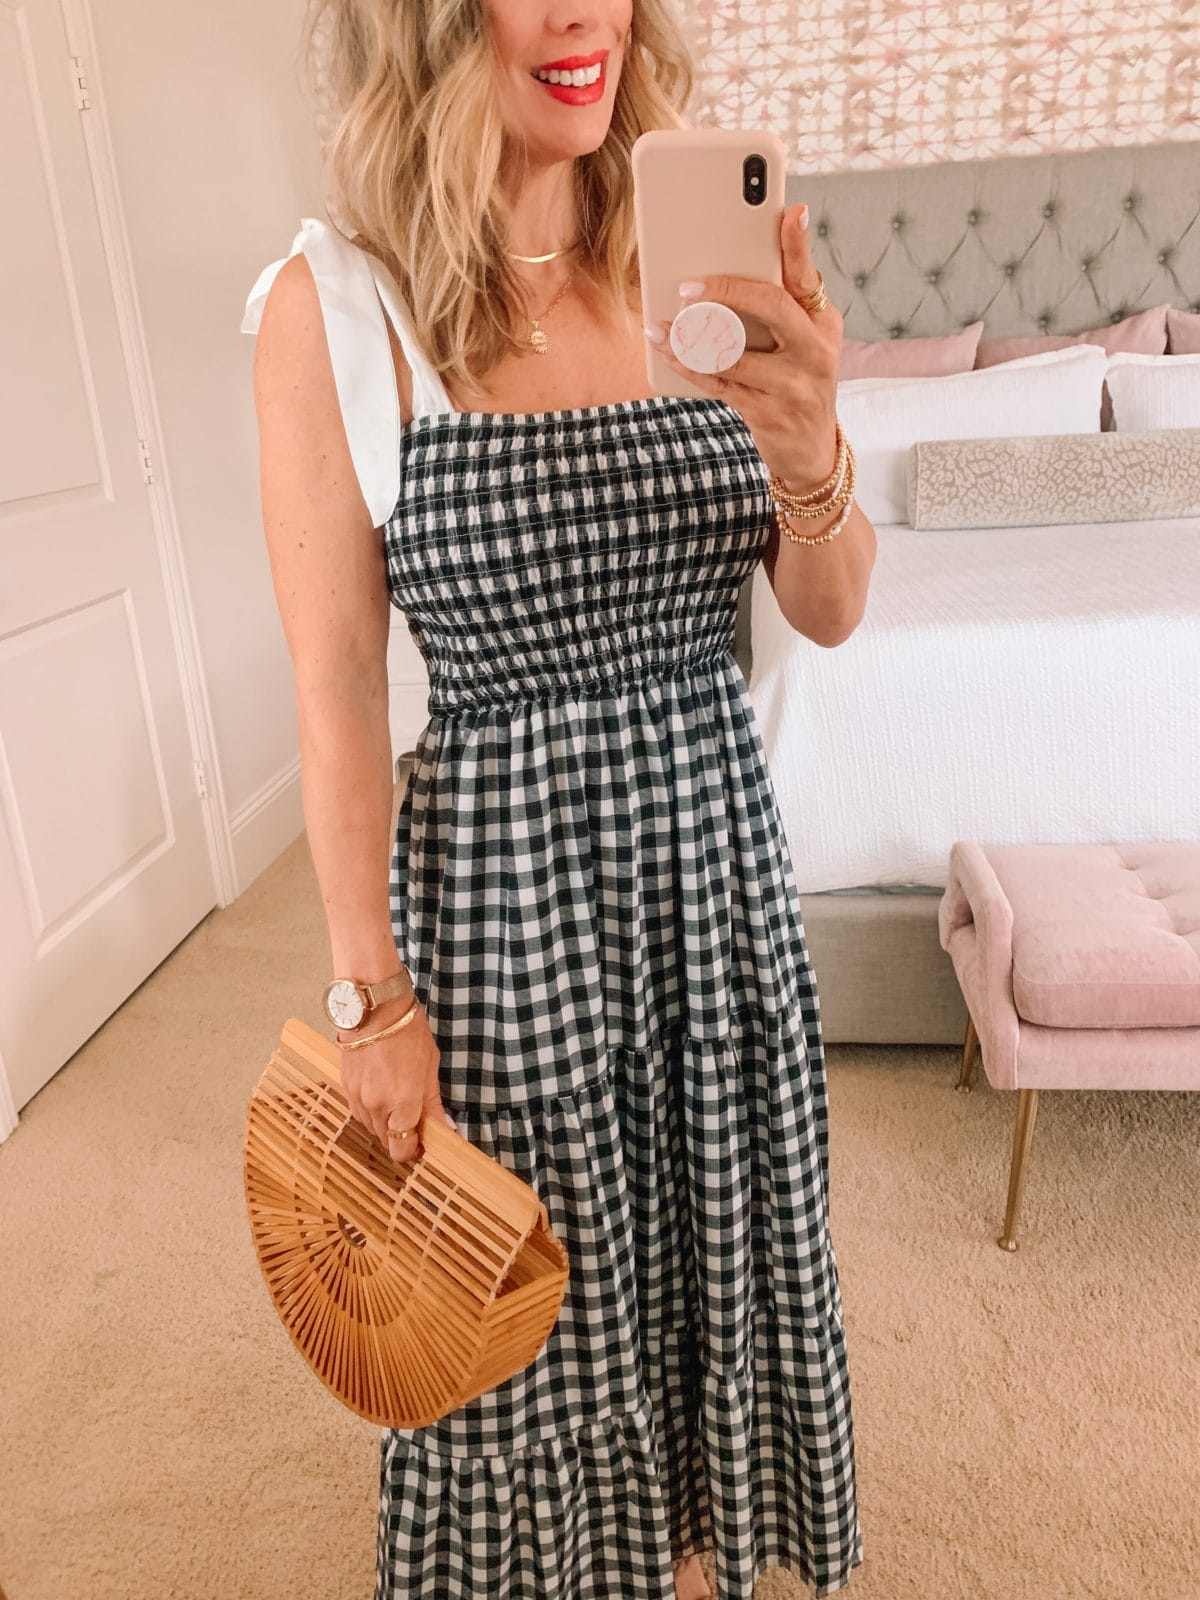 Amazon Fashion Faves, Gingham Dress and Sandals, Bamboo Clutch 